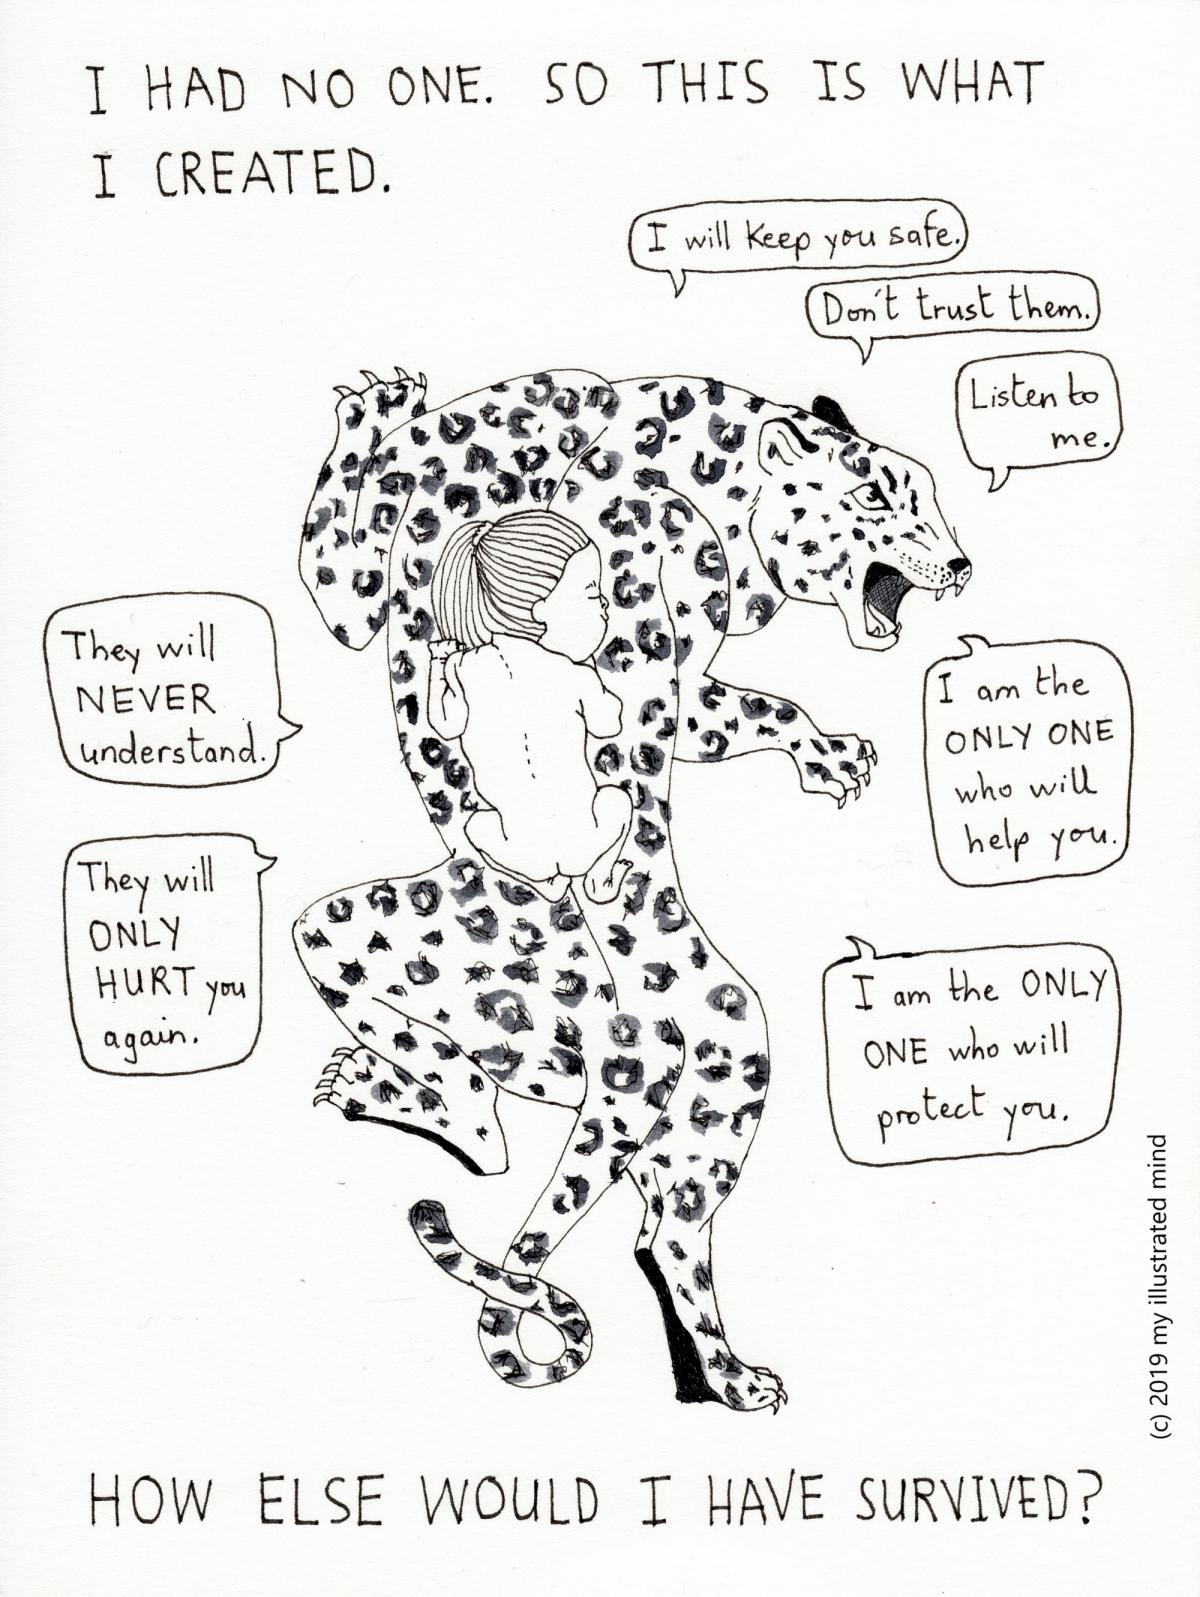 “Snow Leopard” from my illustrated mind, by Kathryn Watson